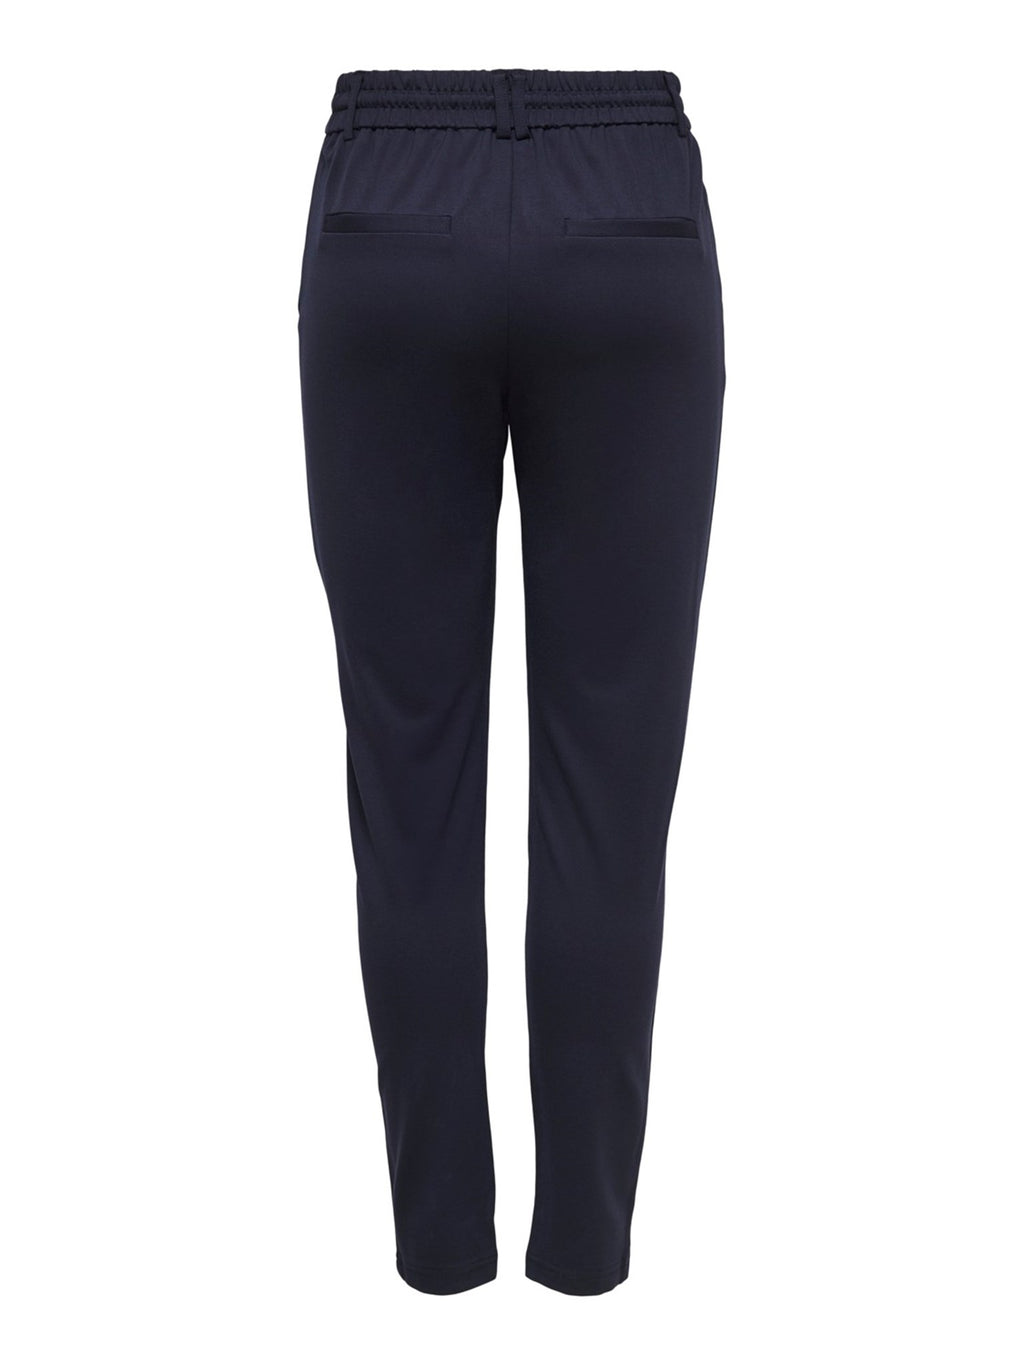 Poptrash Trousers - Navy